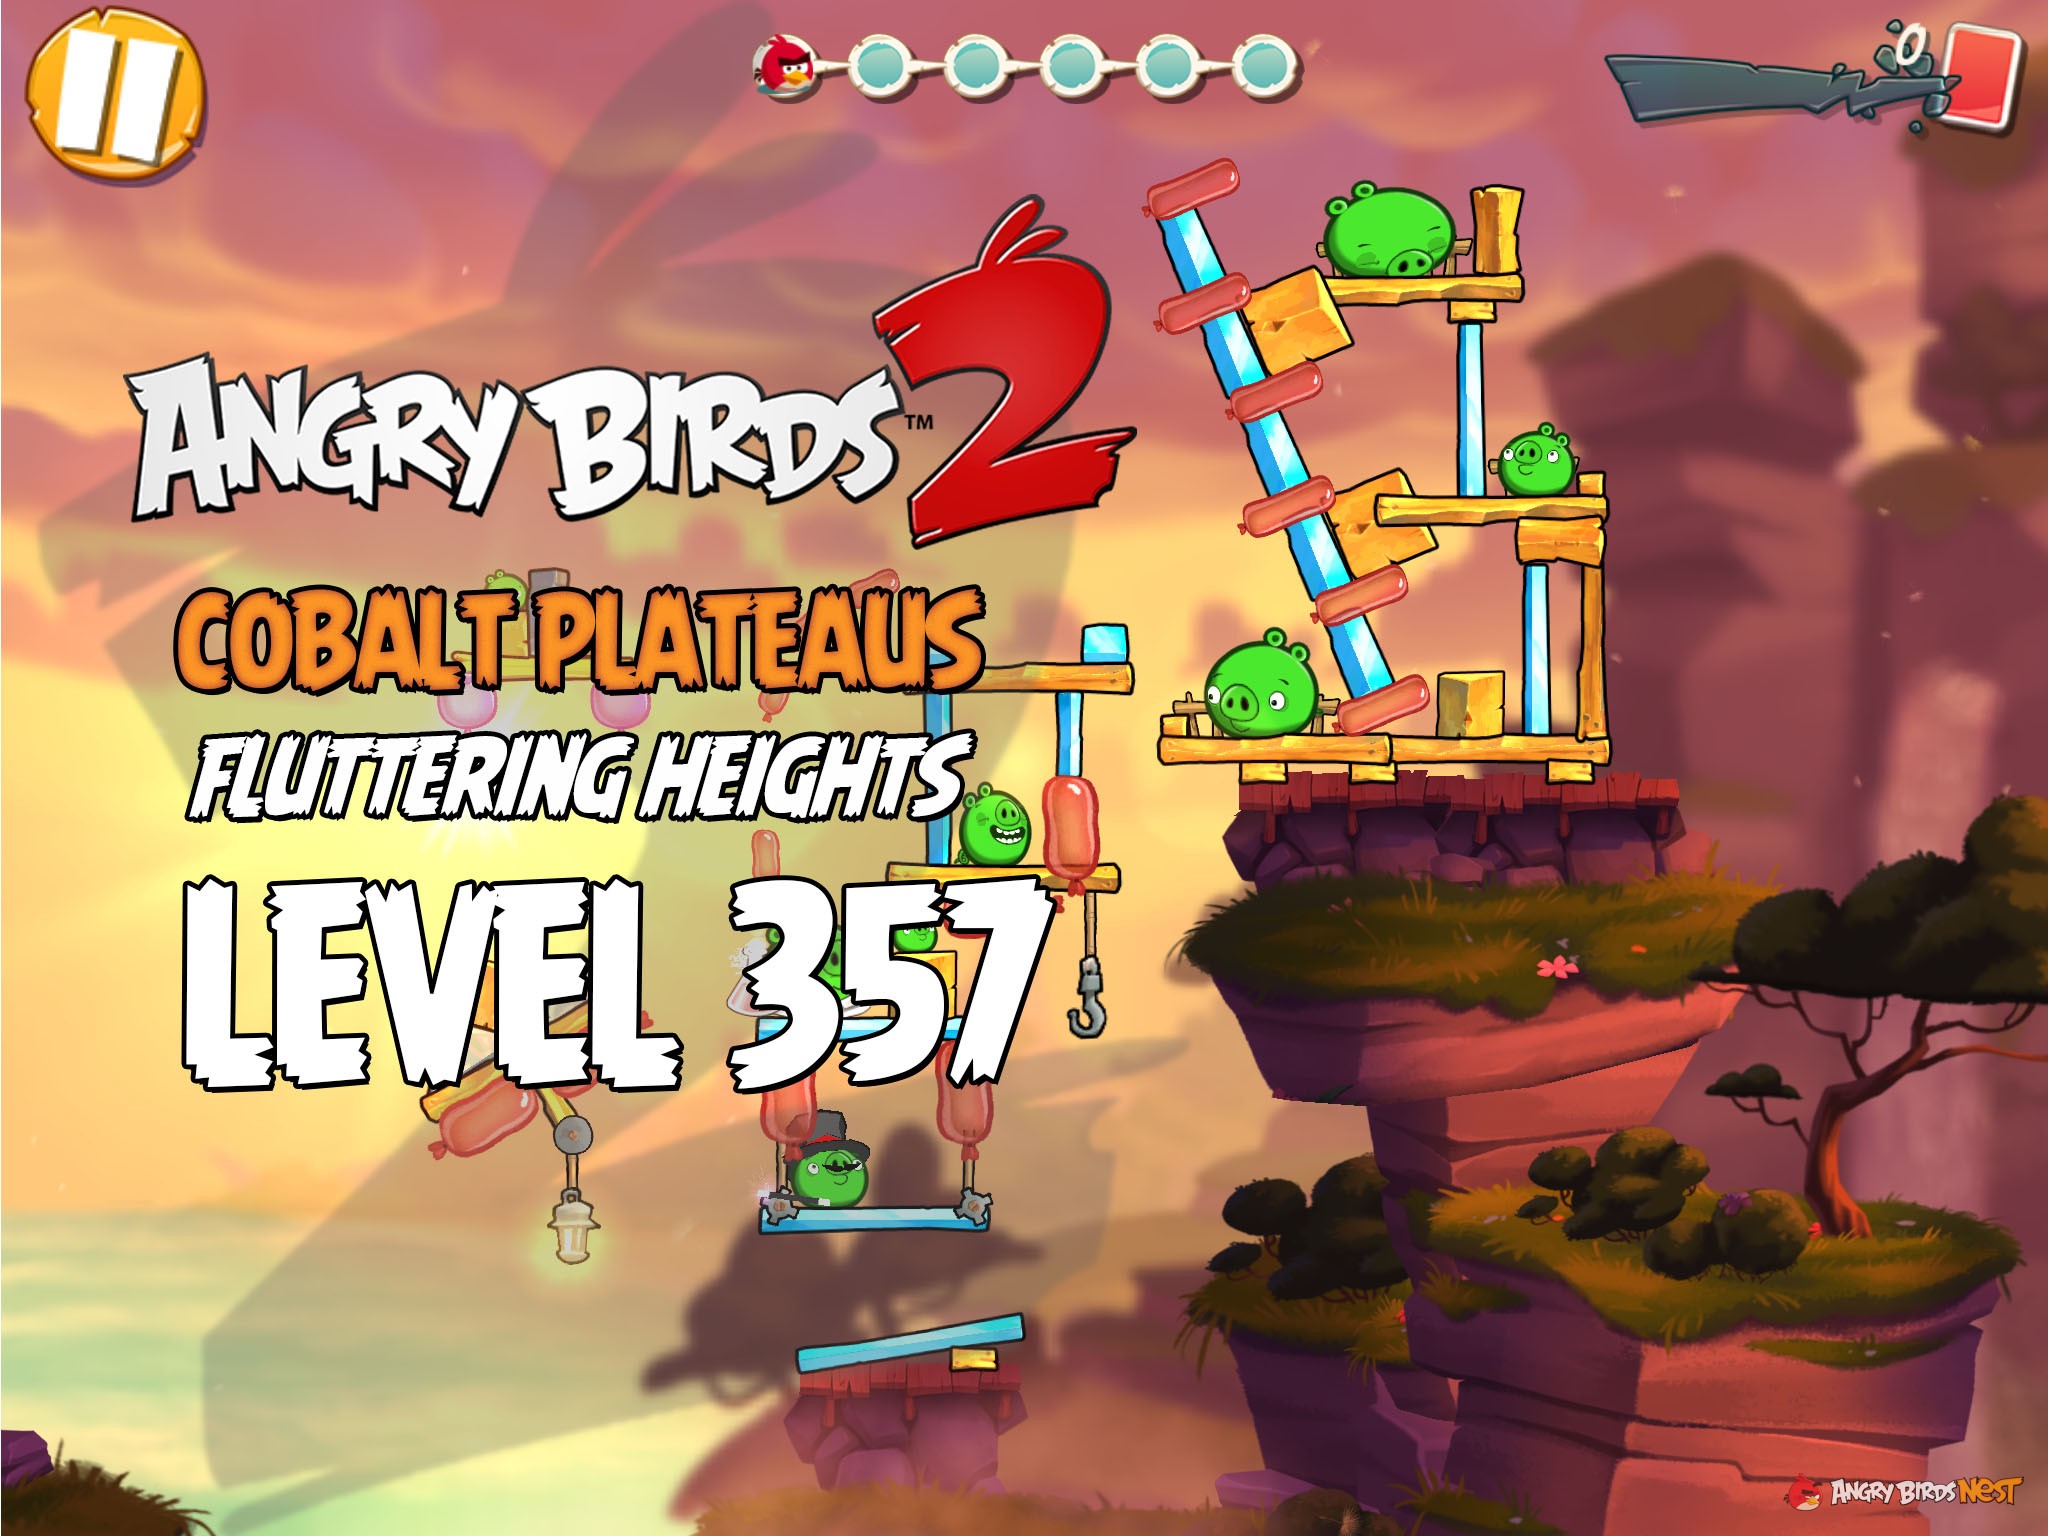 Angry Birds 2 Cobalt Plateaus Fluttering Heights Level 357